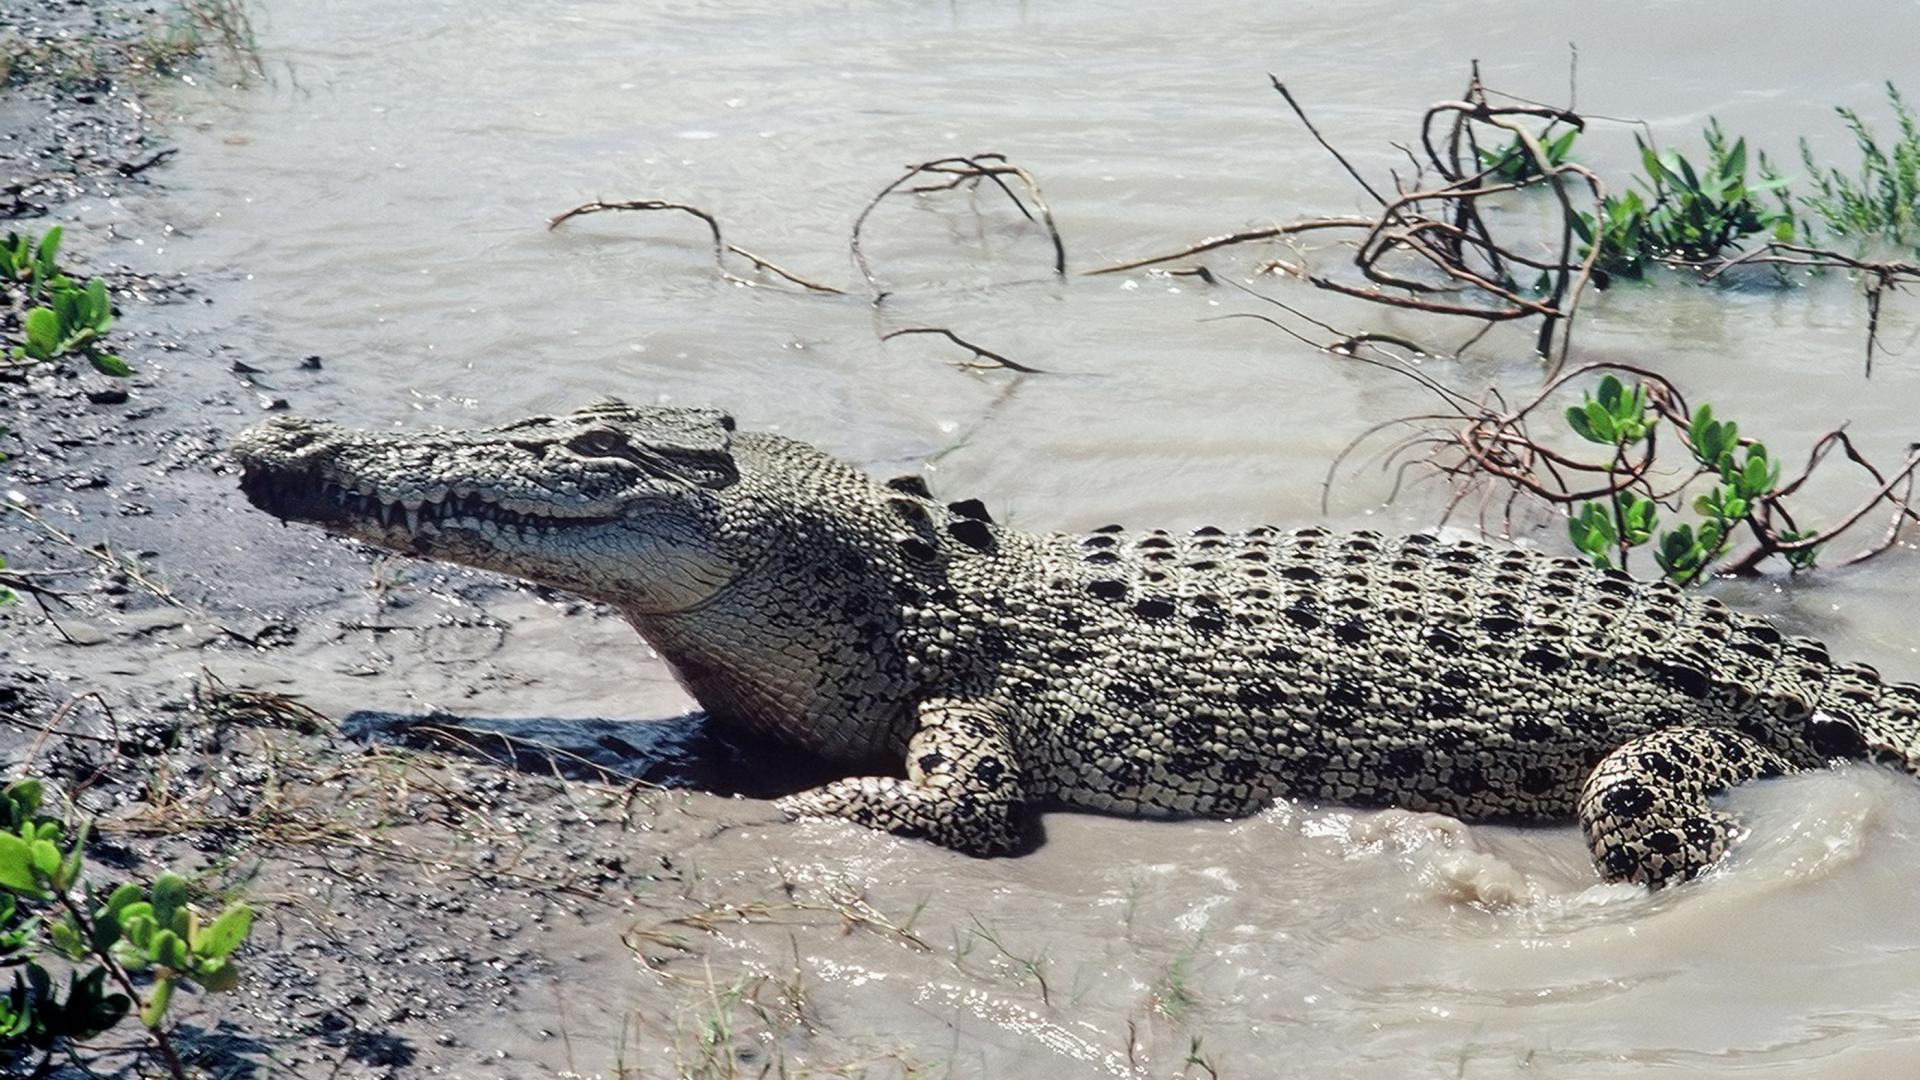 saltwater crocodiles in Malaysia Archives - Clean Malaysia